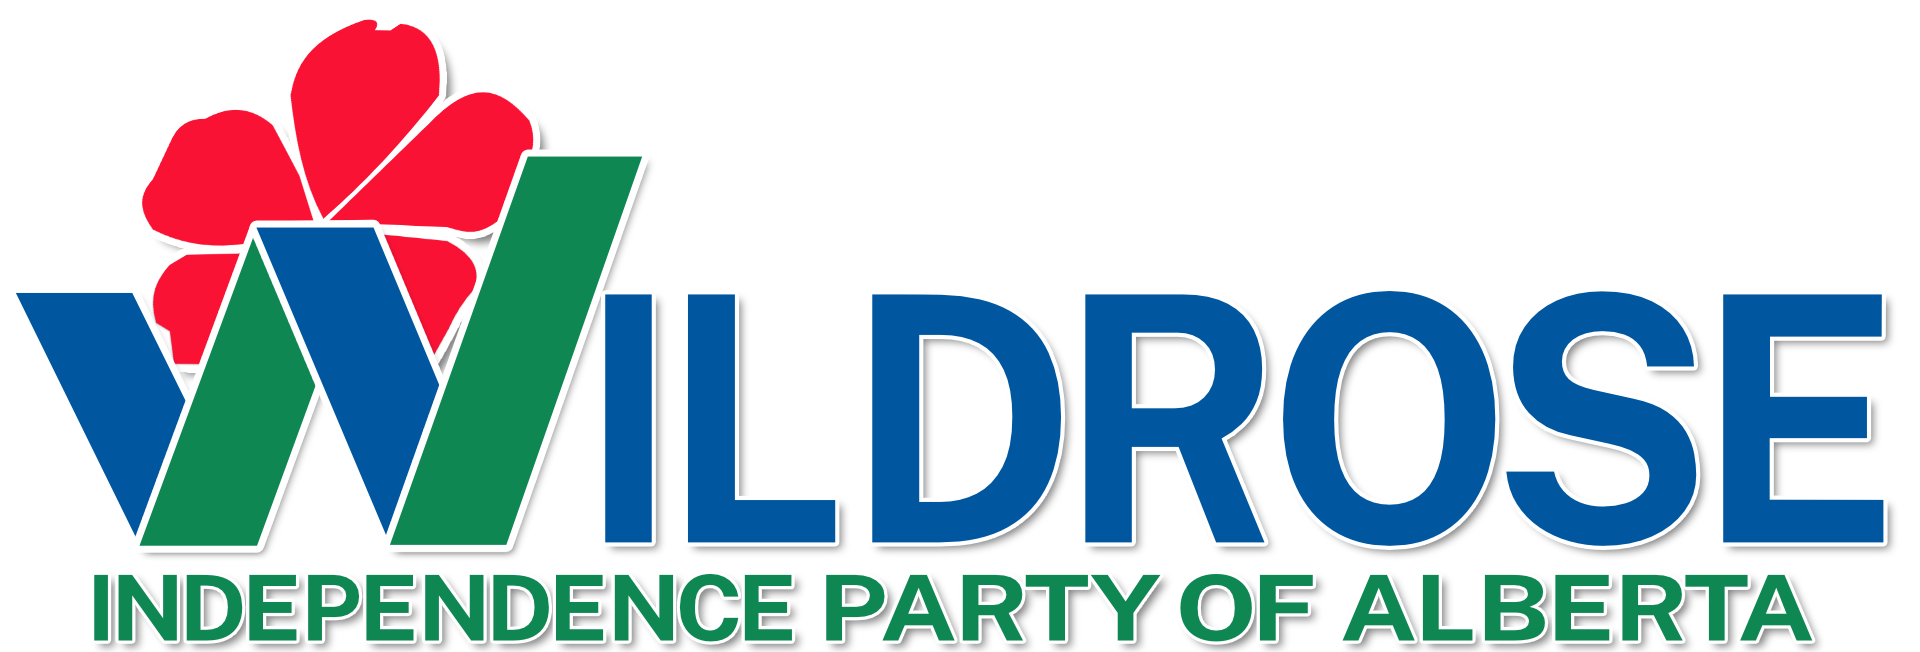 Wildrose-Independence-Party-Logo-horizontal-large-wildrose-with-outline-and-shadow.png